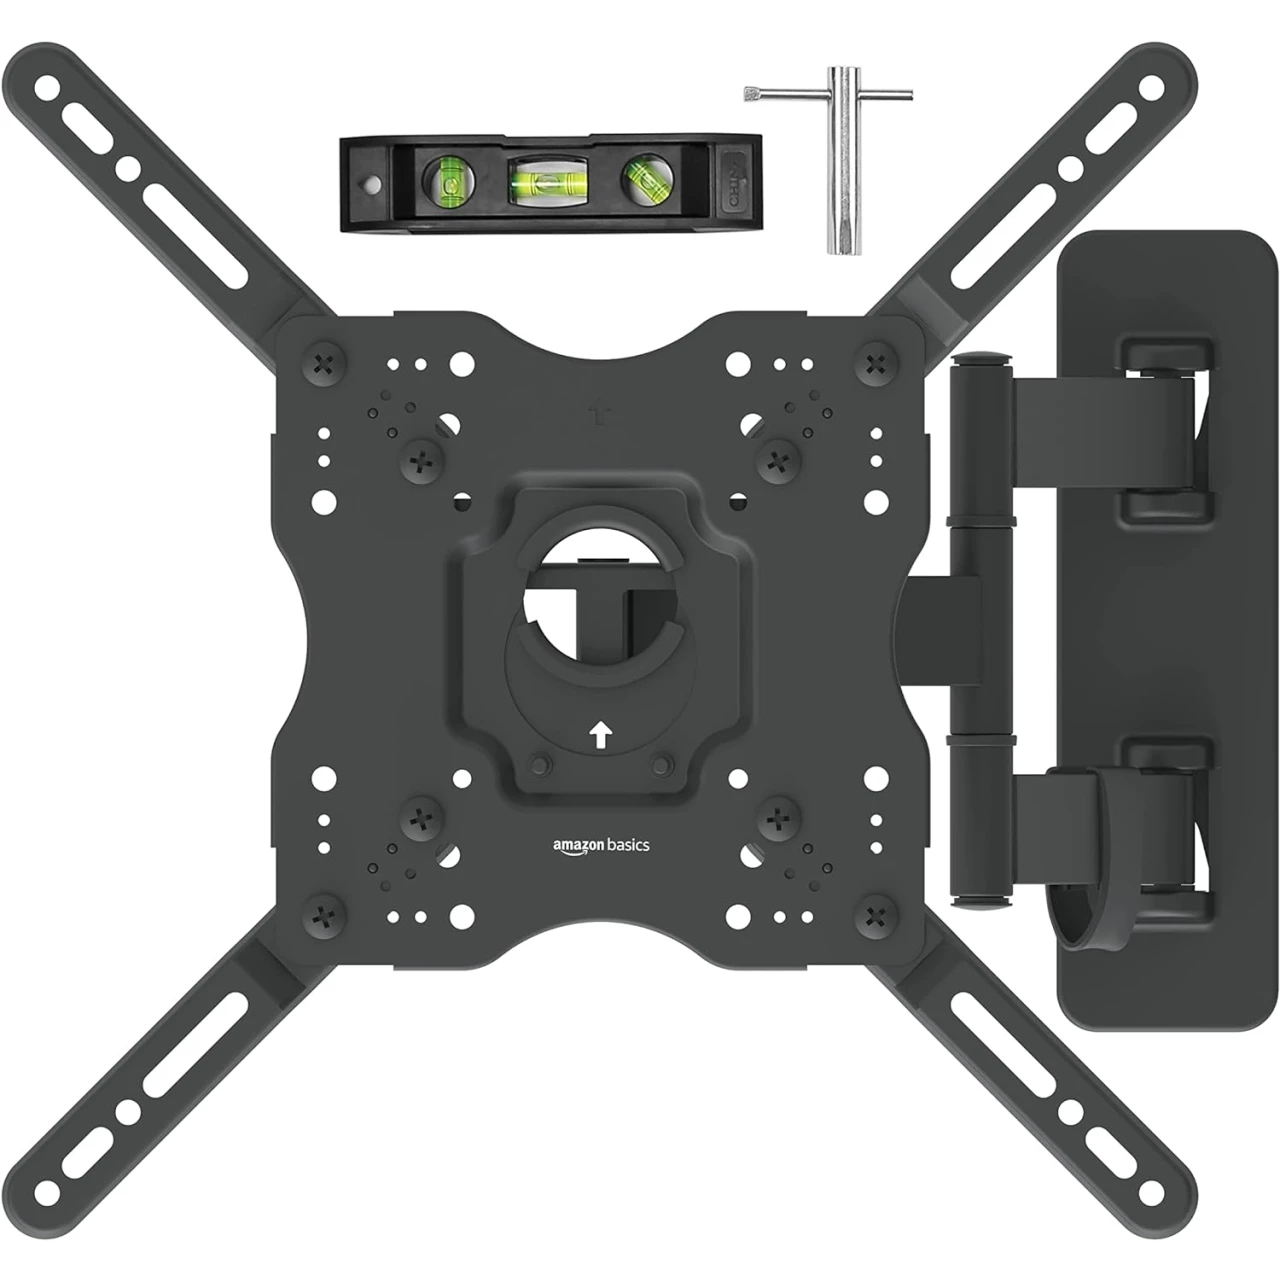 Amazon Basics Full Motion Articulating TV Monitor Wall Mount for 26&quot; to 55&quot; TVs and Flat Panels up to 80 Lbs, Black